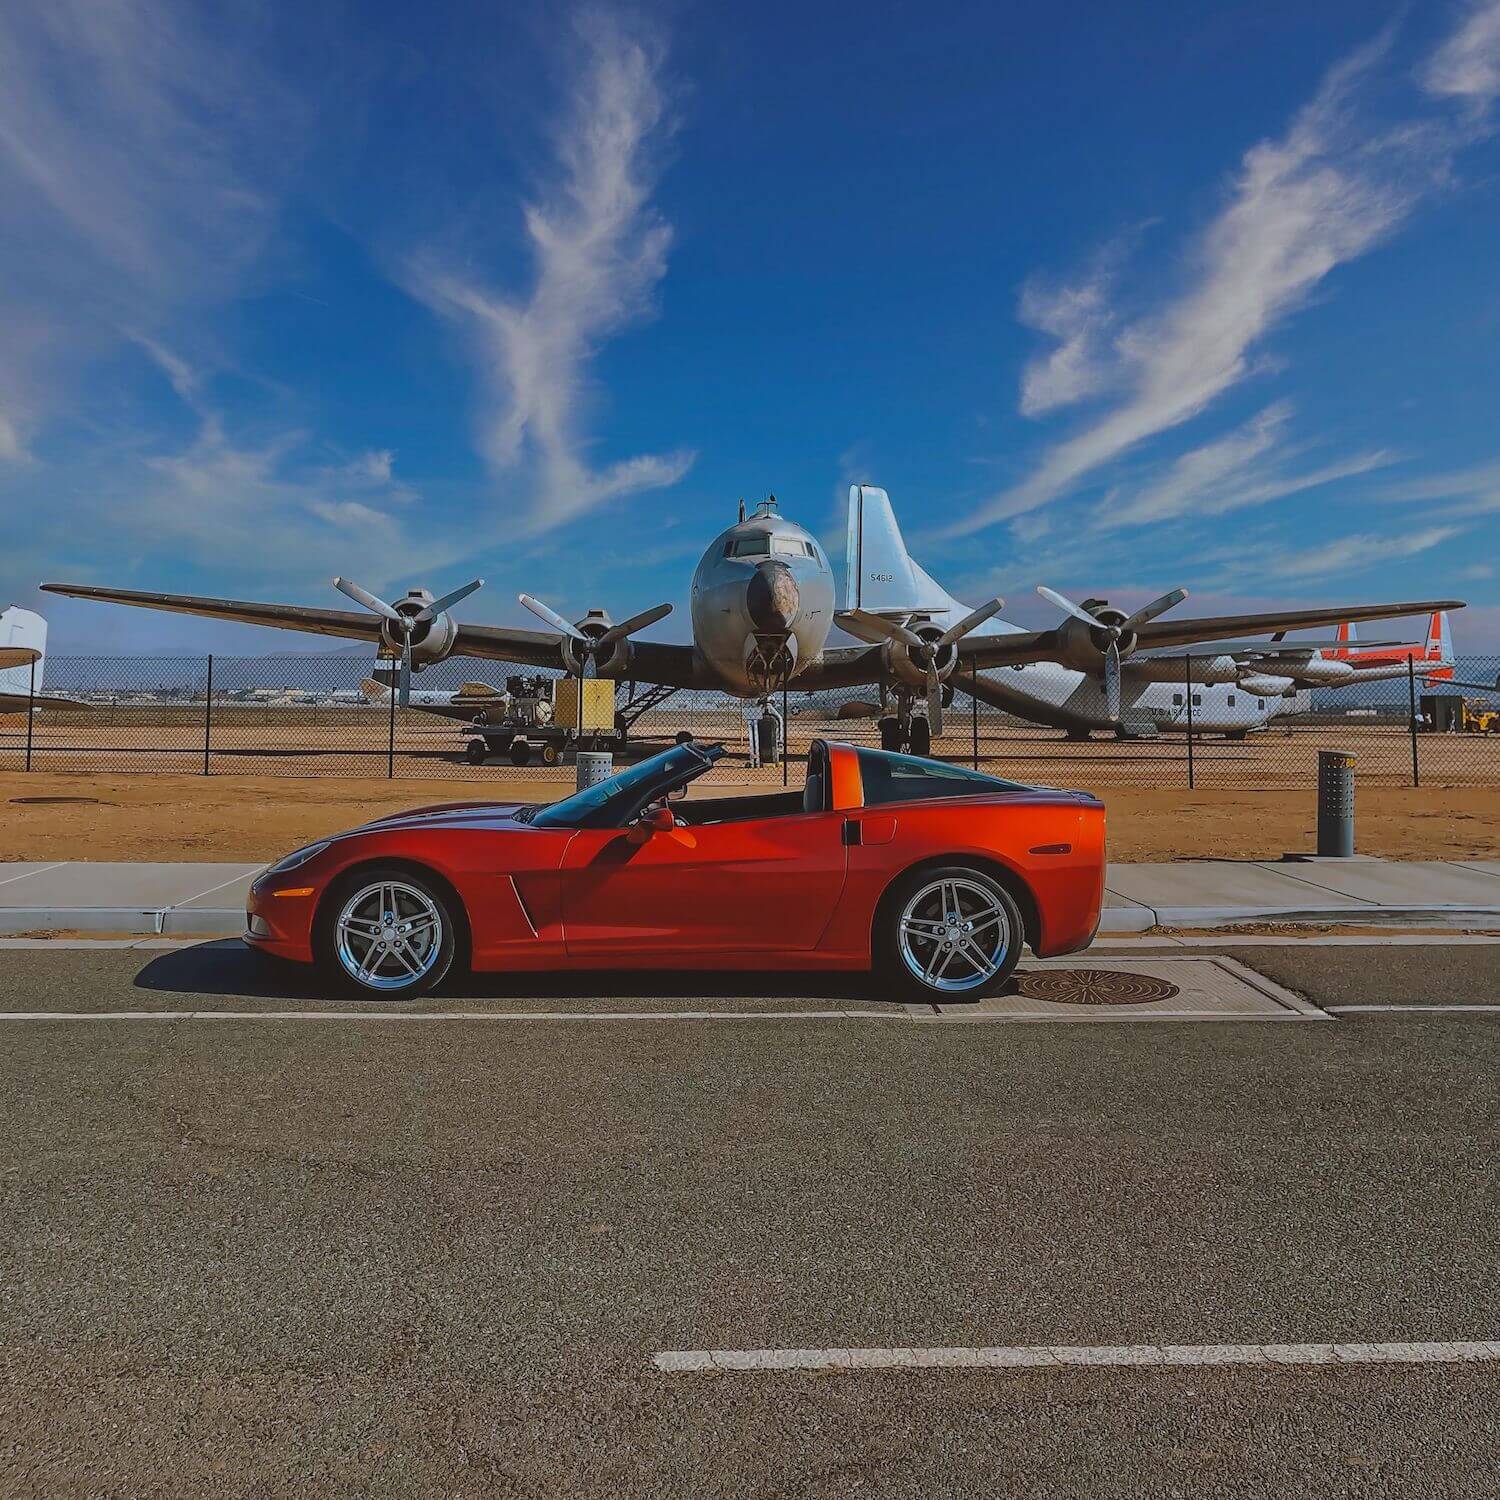 A burnt orange Corvette parked in front of an airport, planes visible in the background.